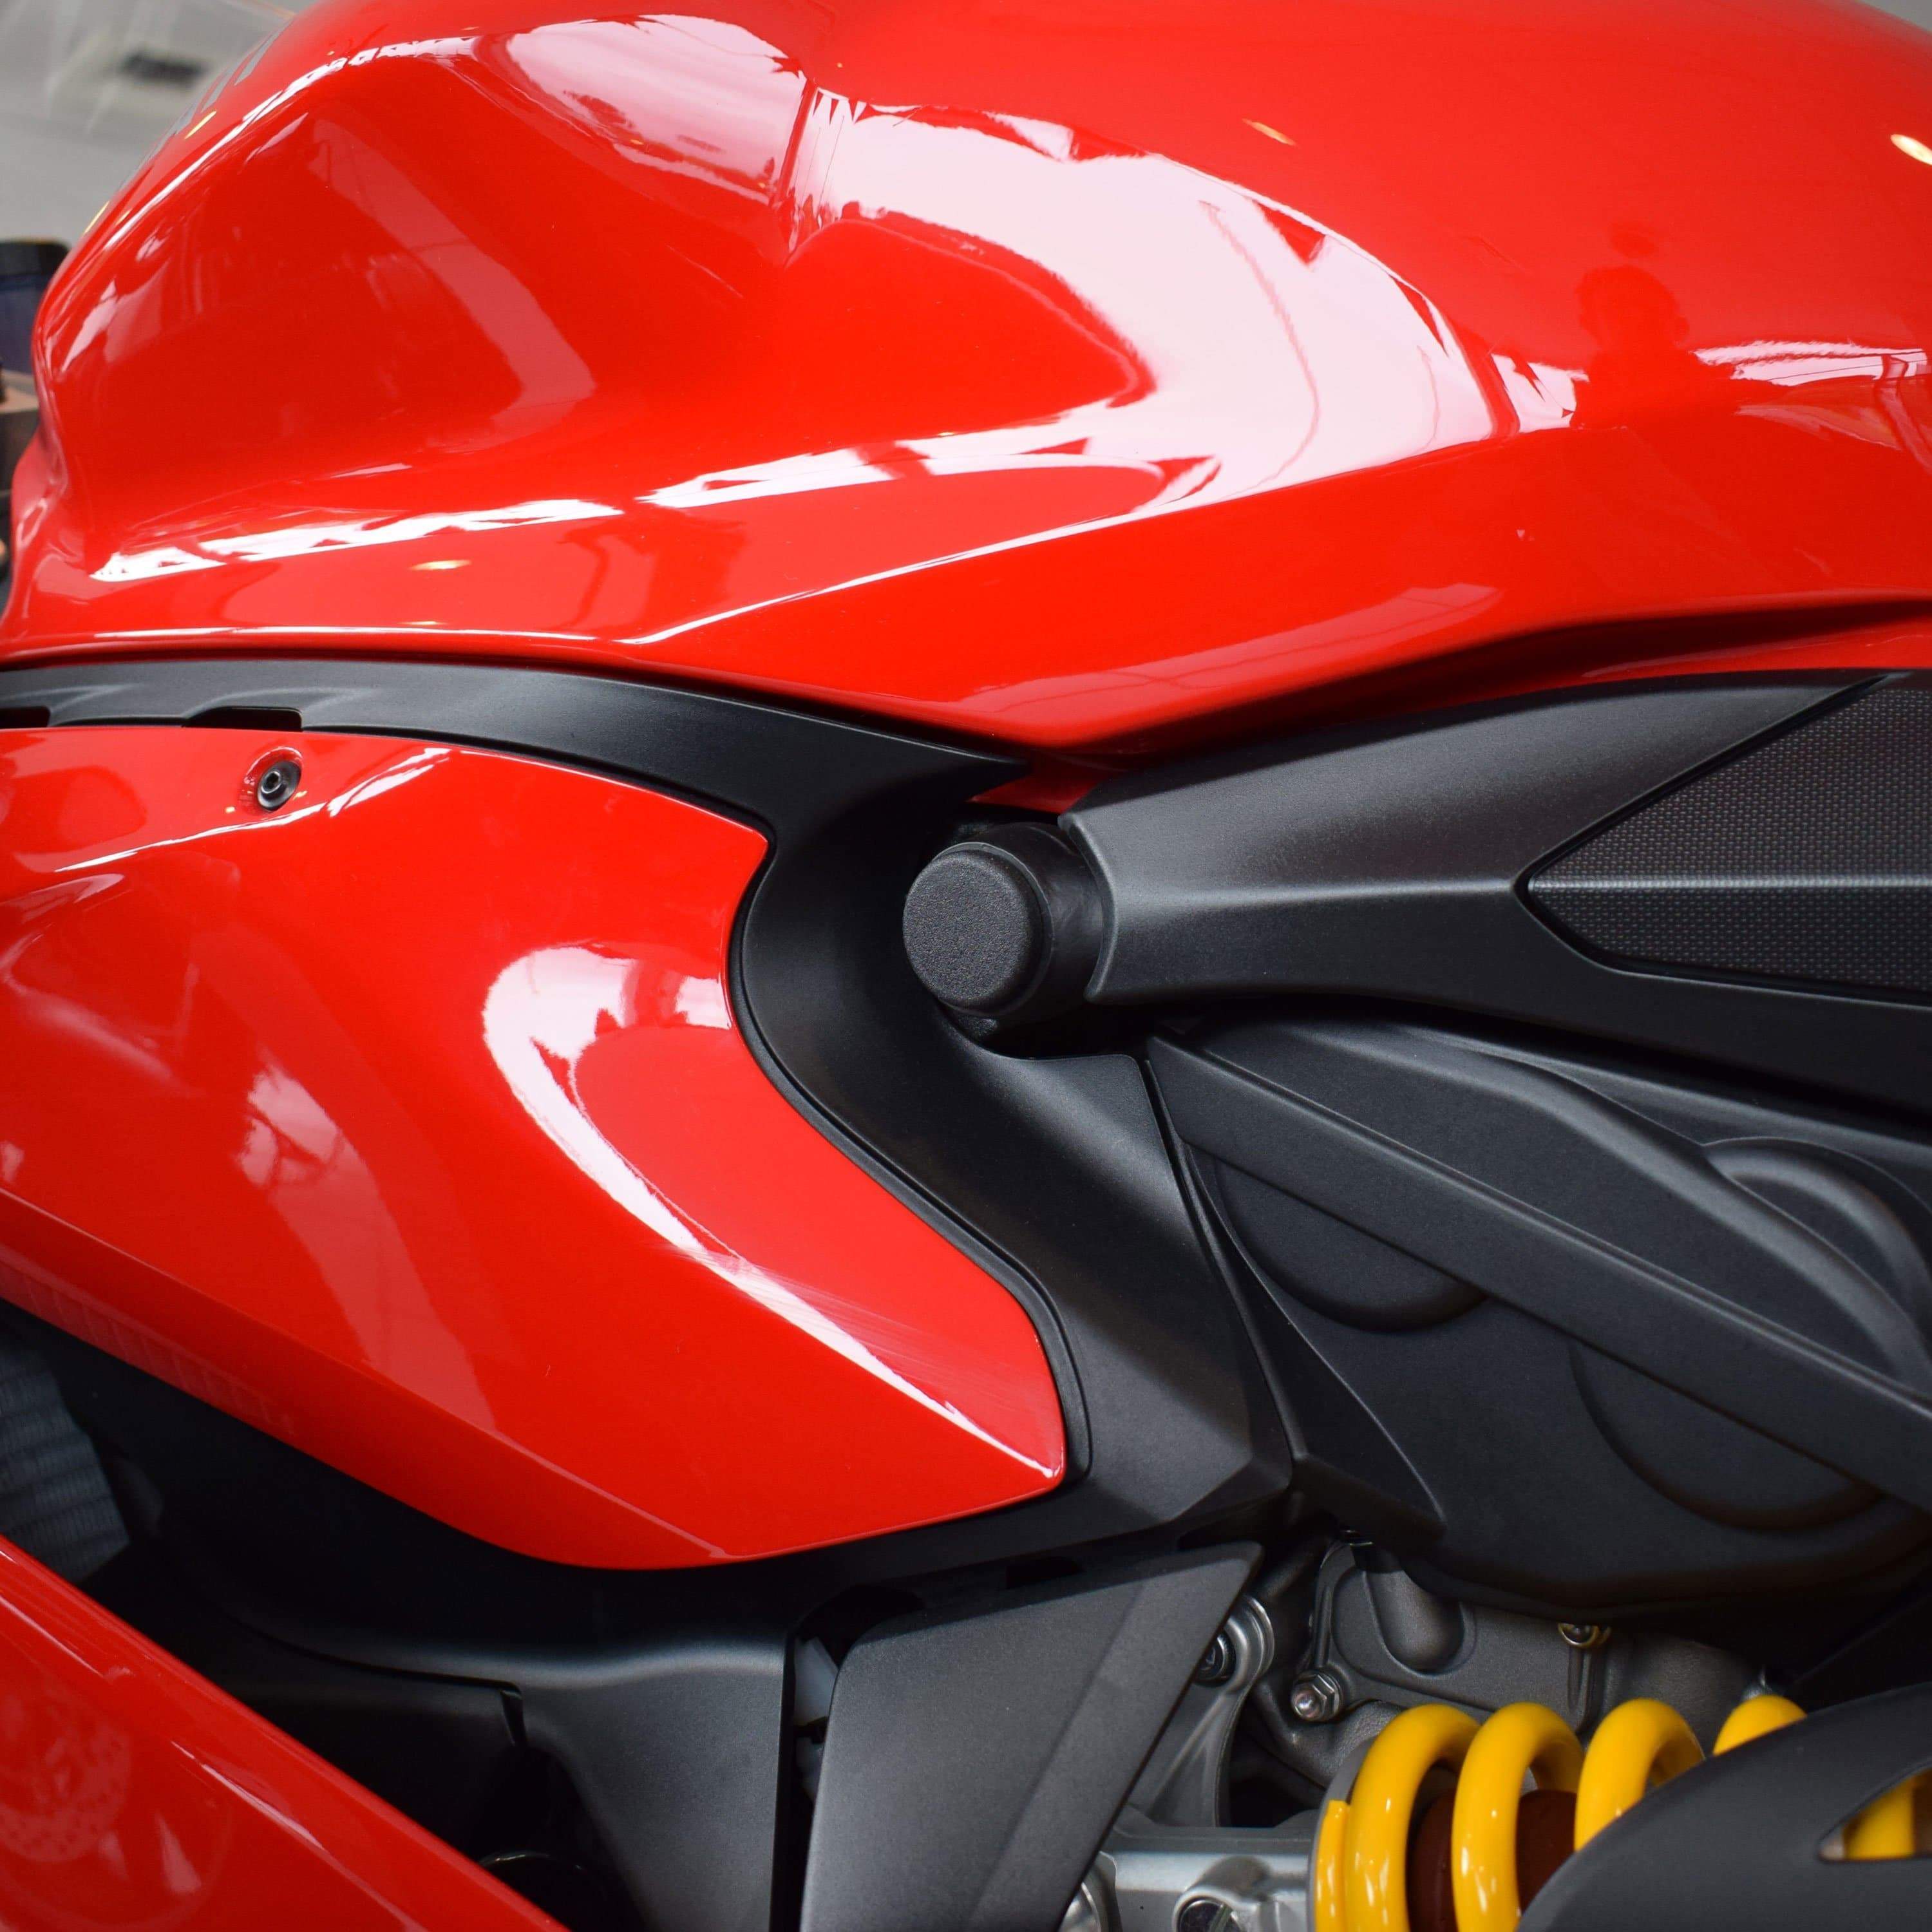 Pyramid Frame End Caps | Matte Black | Ducati 899 Panigale 2013>2015-089501-Frame End Caps-Pyramid Motorcycle Accessories